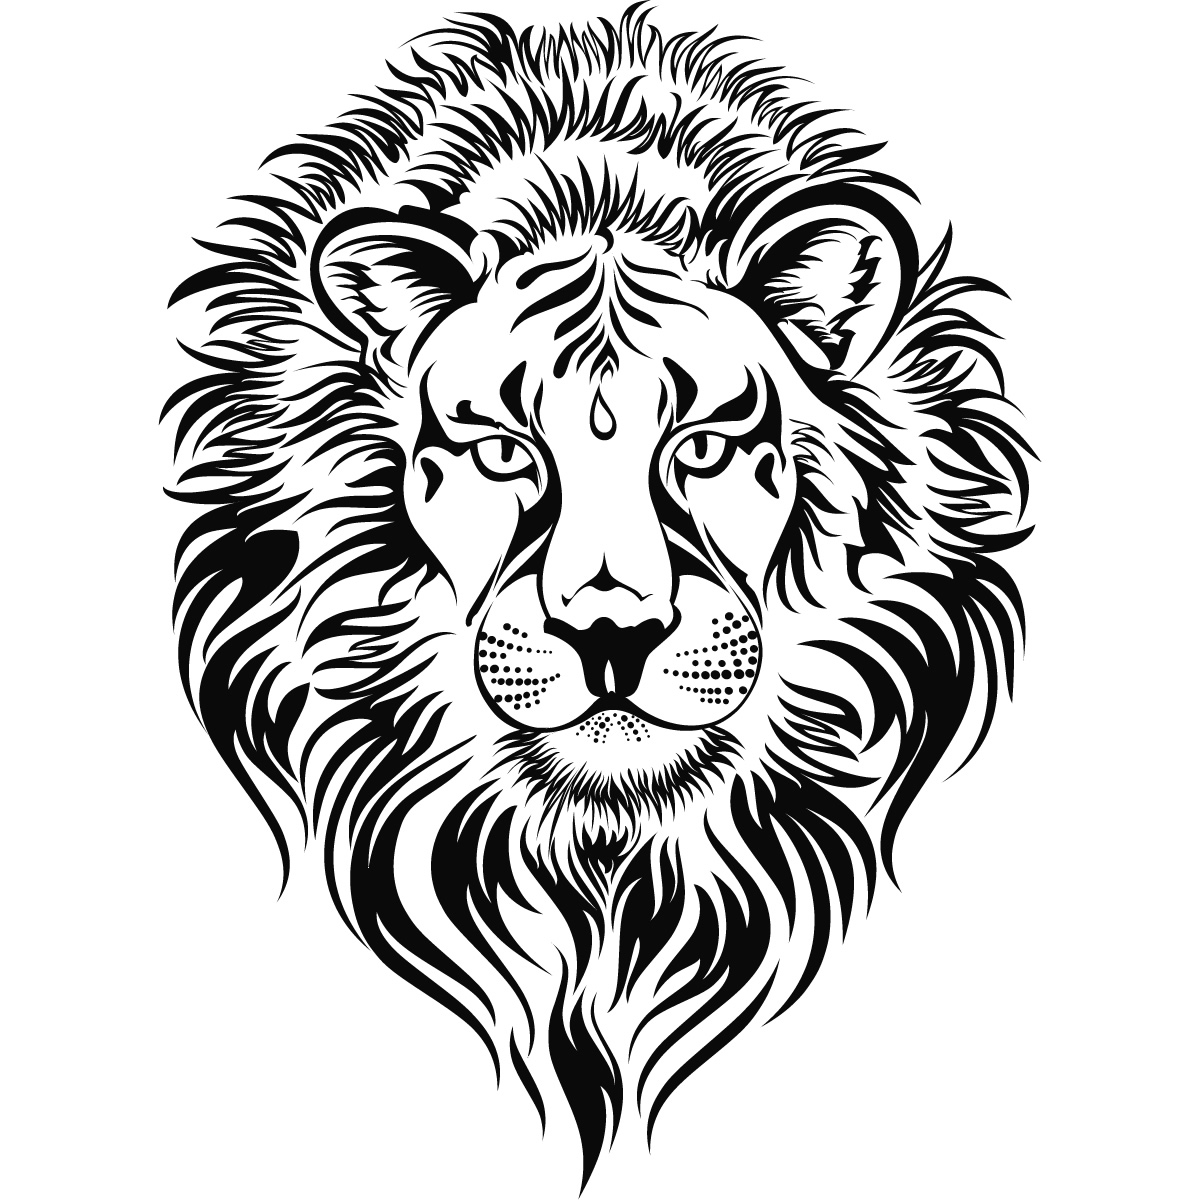 Lion Head Clipart Black And White - ClipArt Best